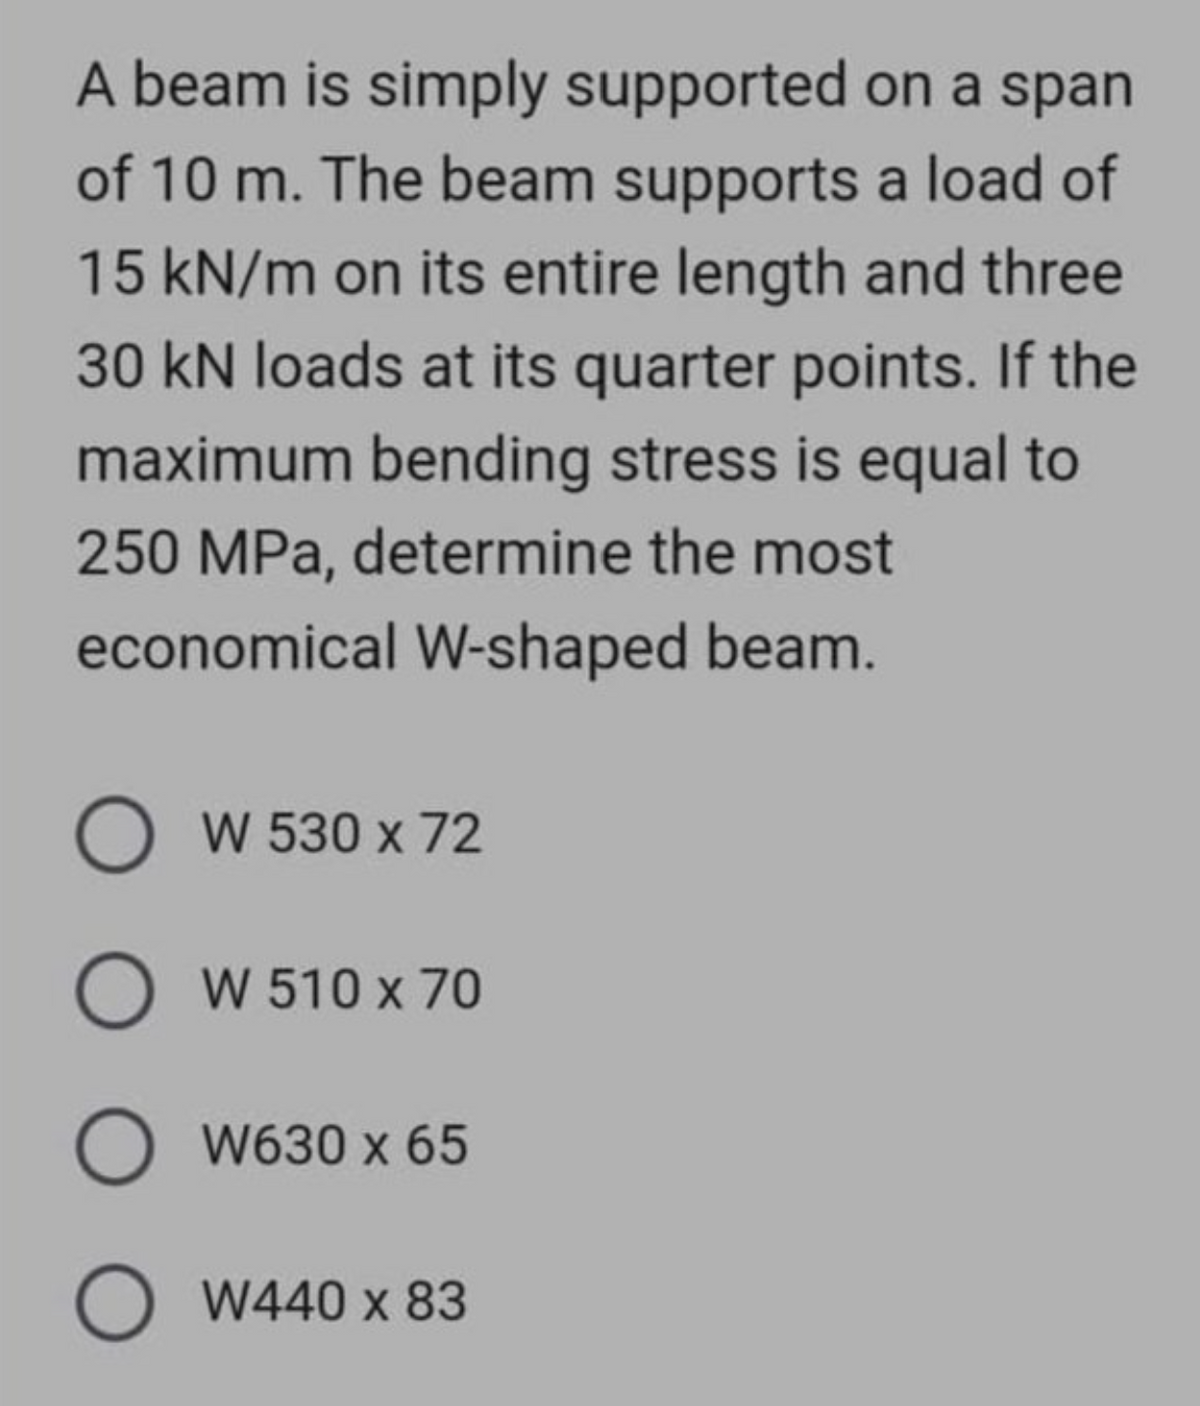 A beam is simply supported on a span
of 10 m. The beam supports a load of
15 kN/m on its entire length and three
30 kN loads at its quarter points. If the
maximum bending stress is equal to
250 MPa, determine the most
economical W-shaped beam.
OW 530 x 72
O W 510 x 70
O W630 x 65
O W440 x 83